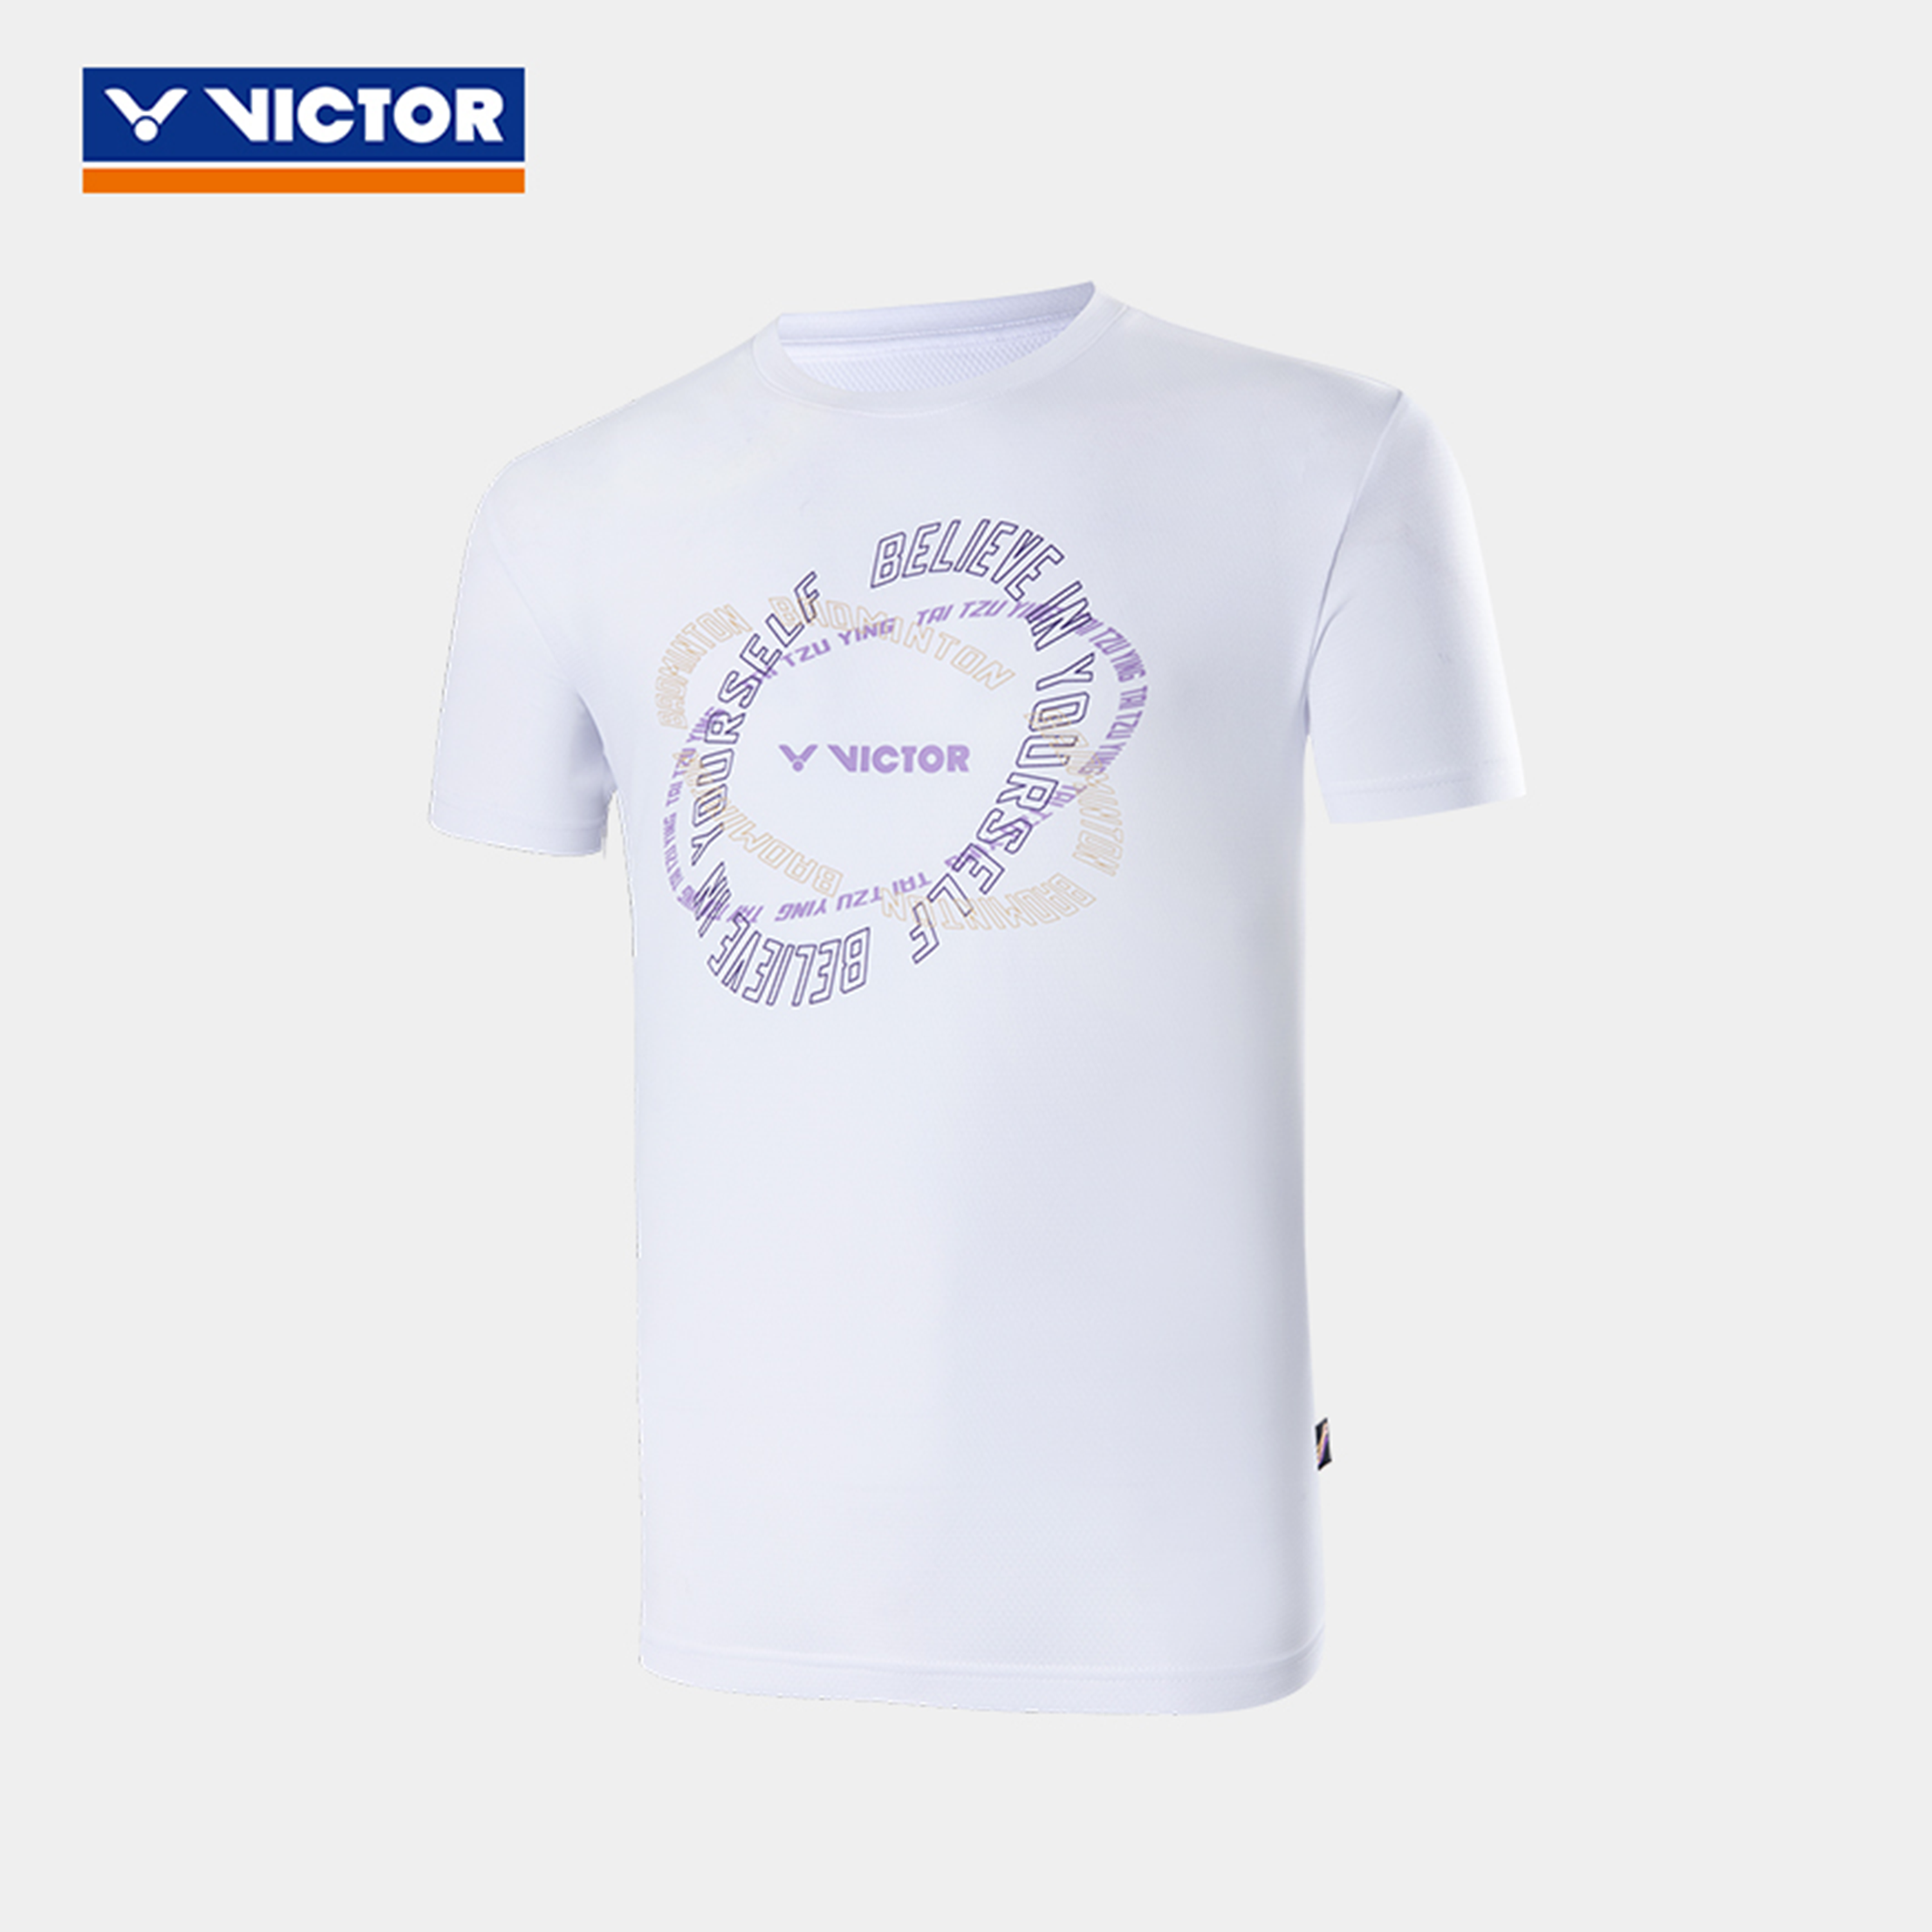 Victor X TTY T-35005A Sports Shirt White UNISEX